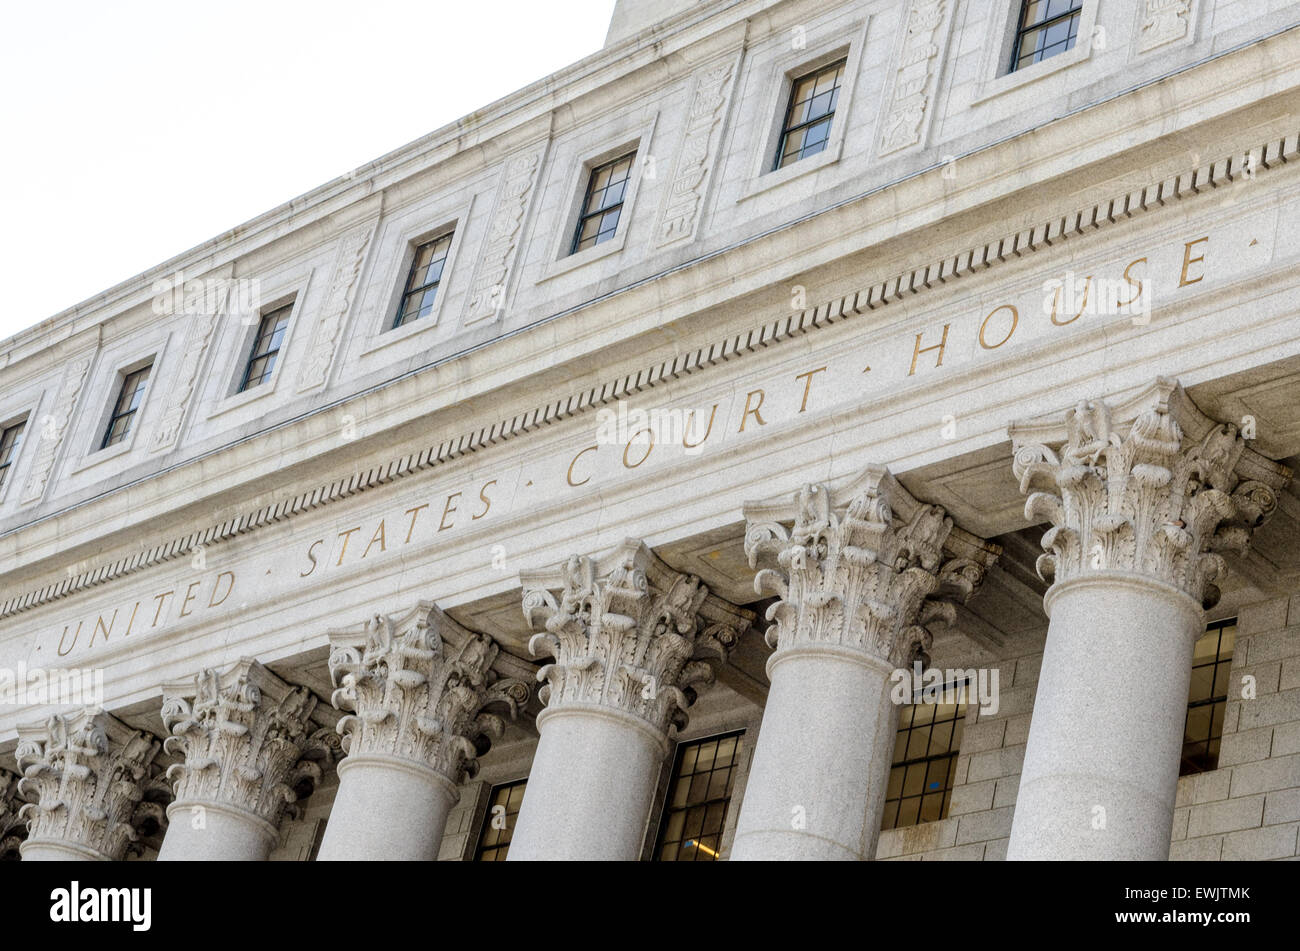 United States Court House in Lower Manhattan in New York city Stockfoto